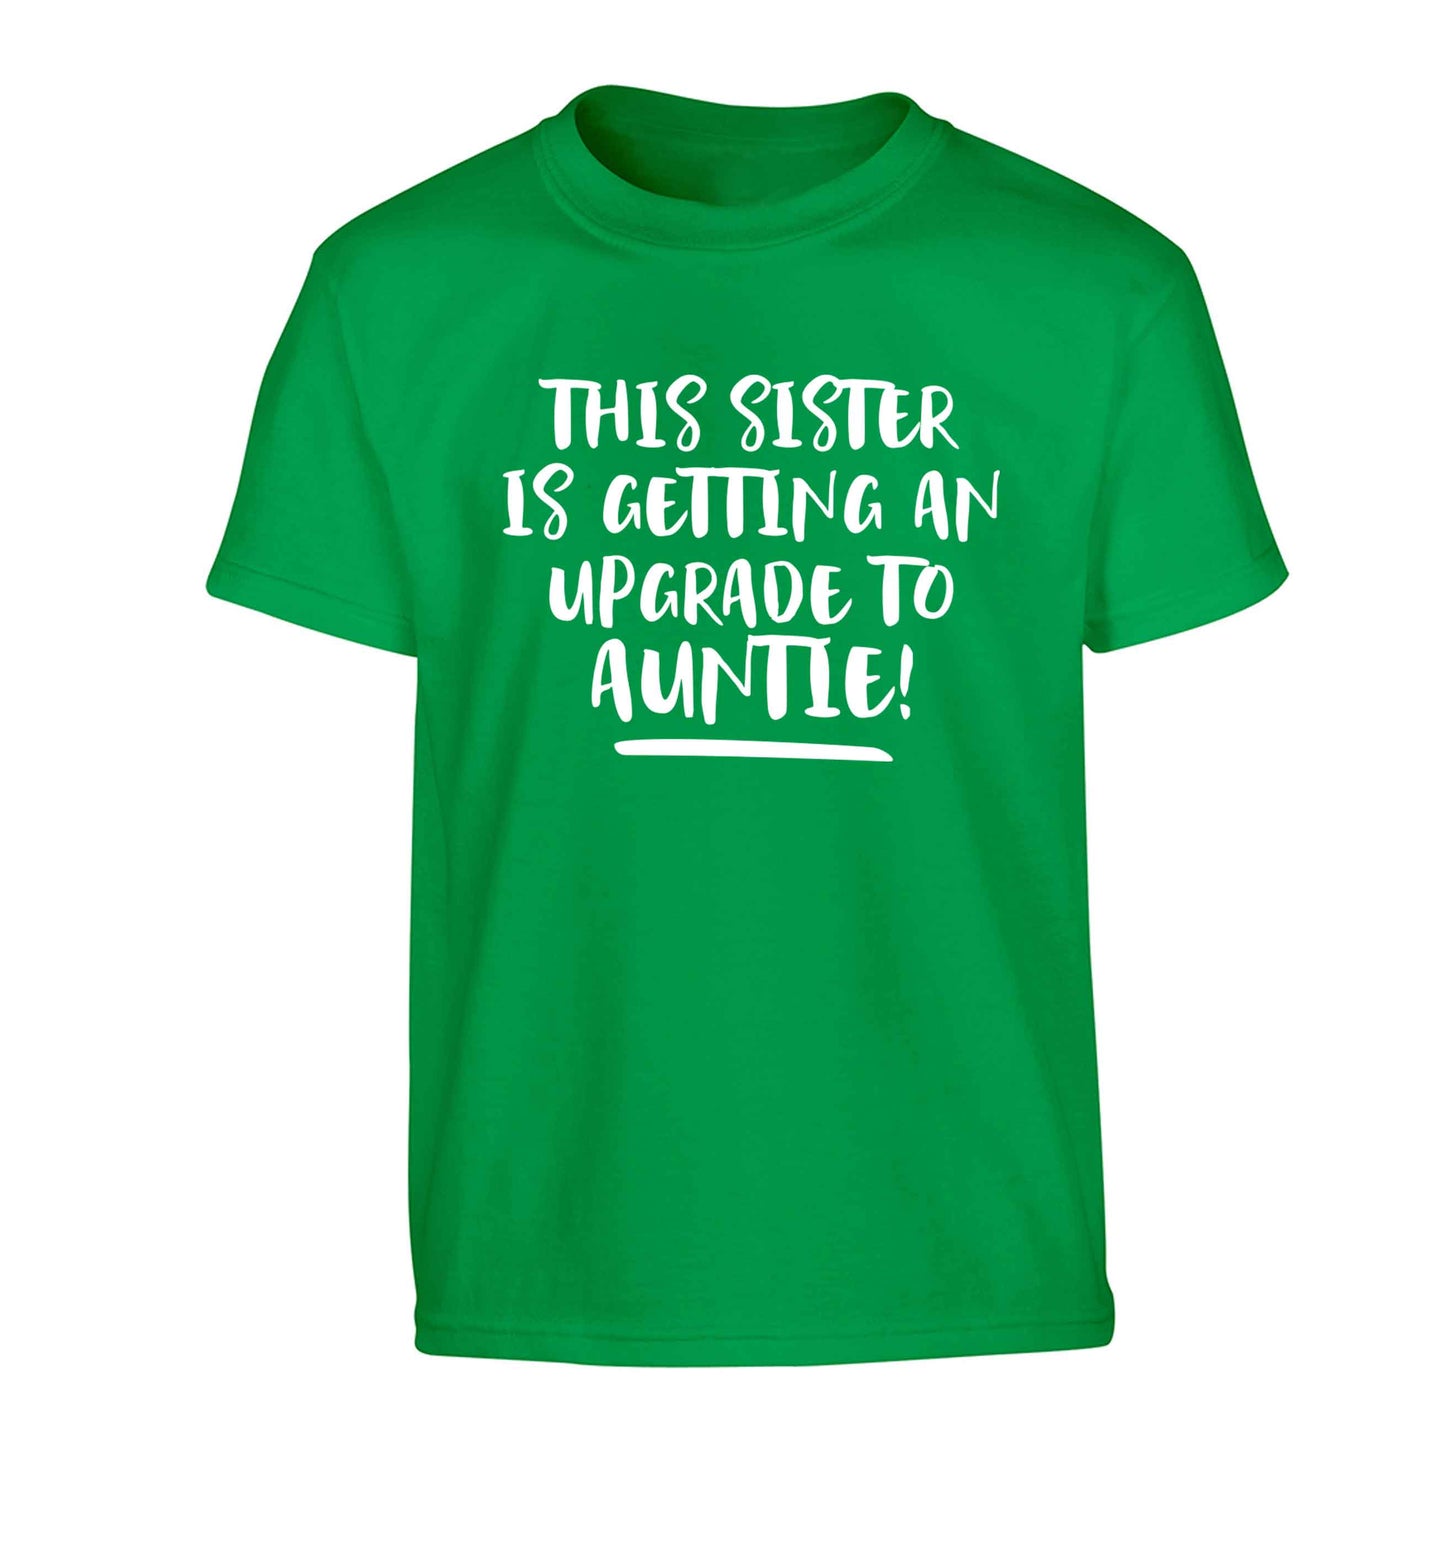 This sister is getting an upgrade to auntie! Children's green Tshirt 12-13 Years